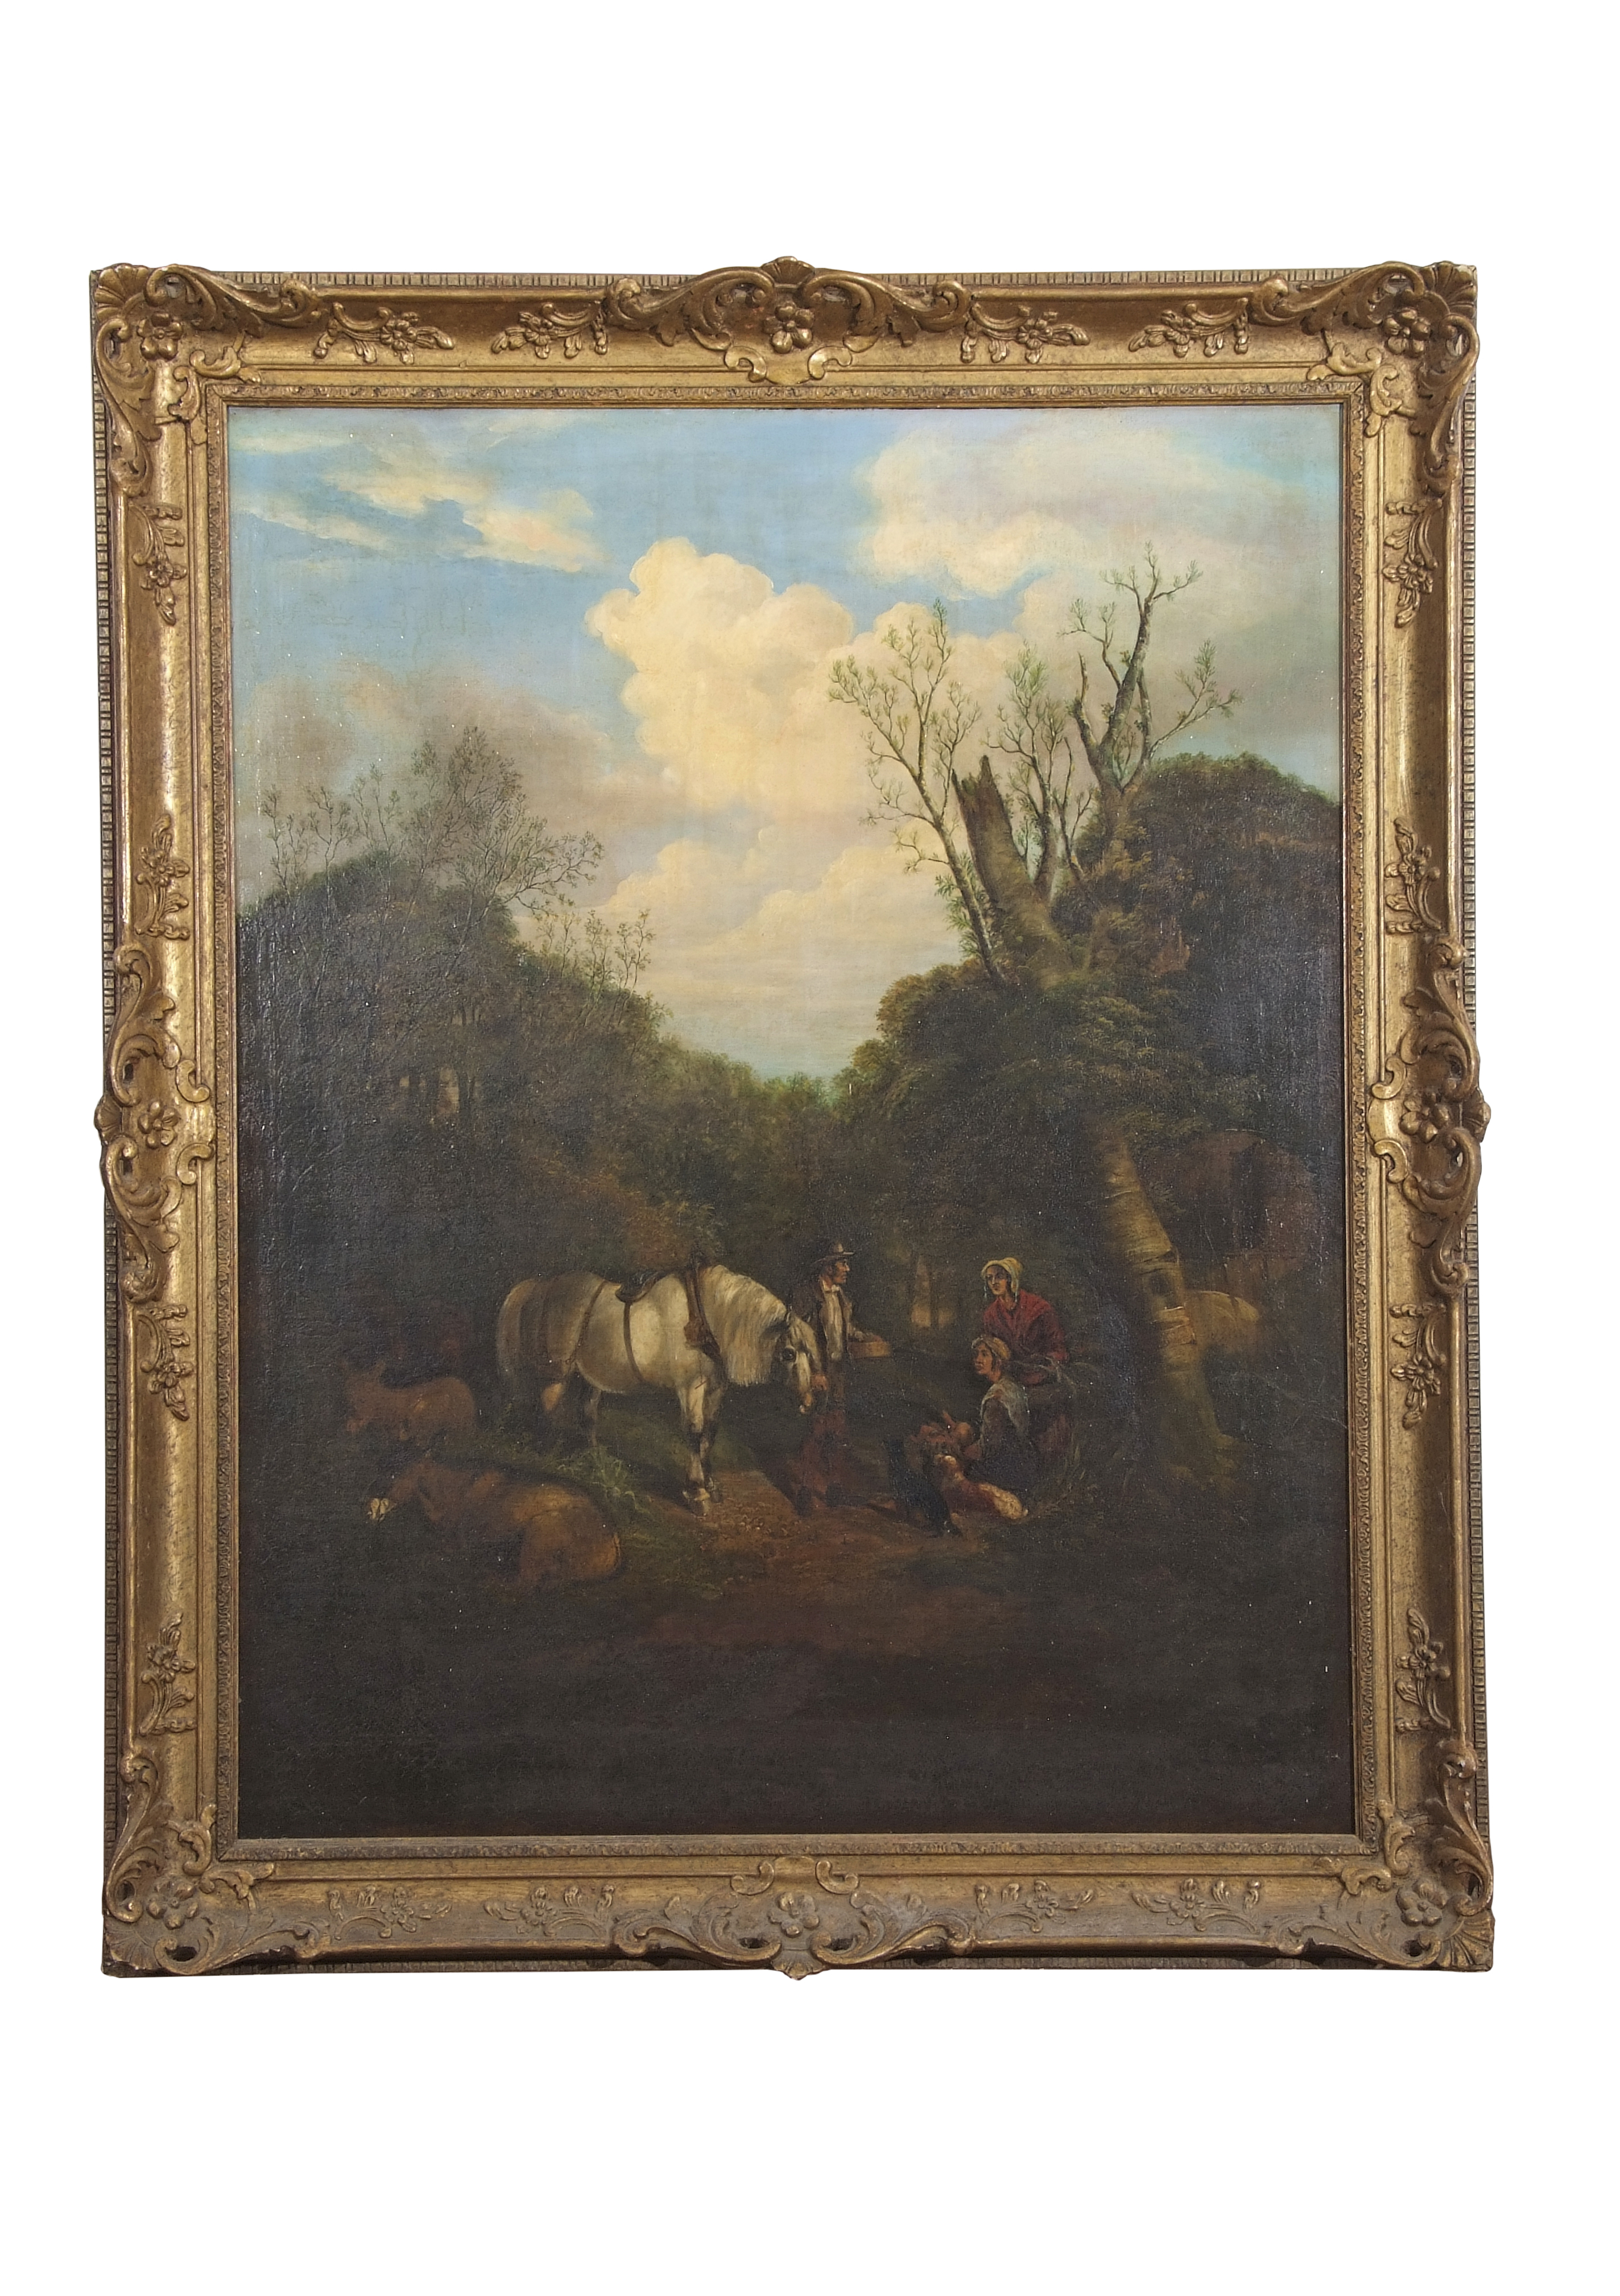 English School (19th century), Travellers and animals in country lane, oil on canvas, 95 x 74cm